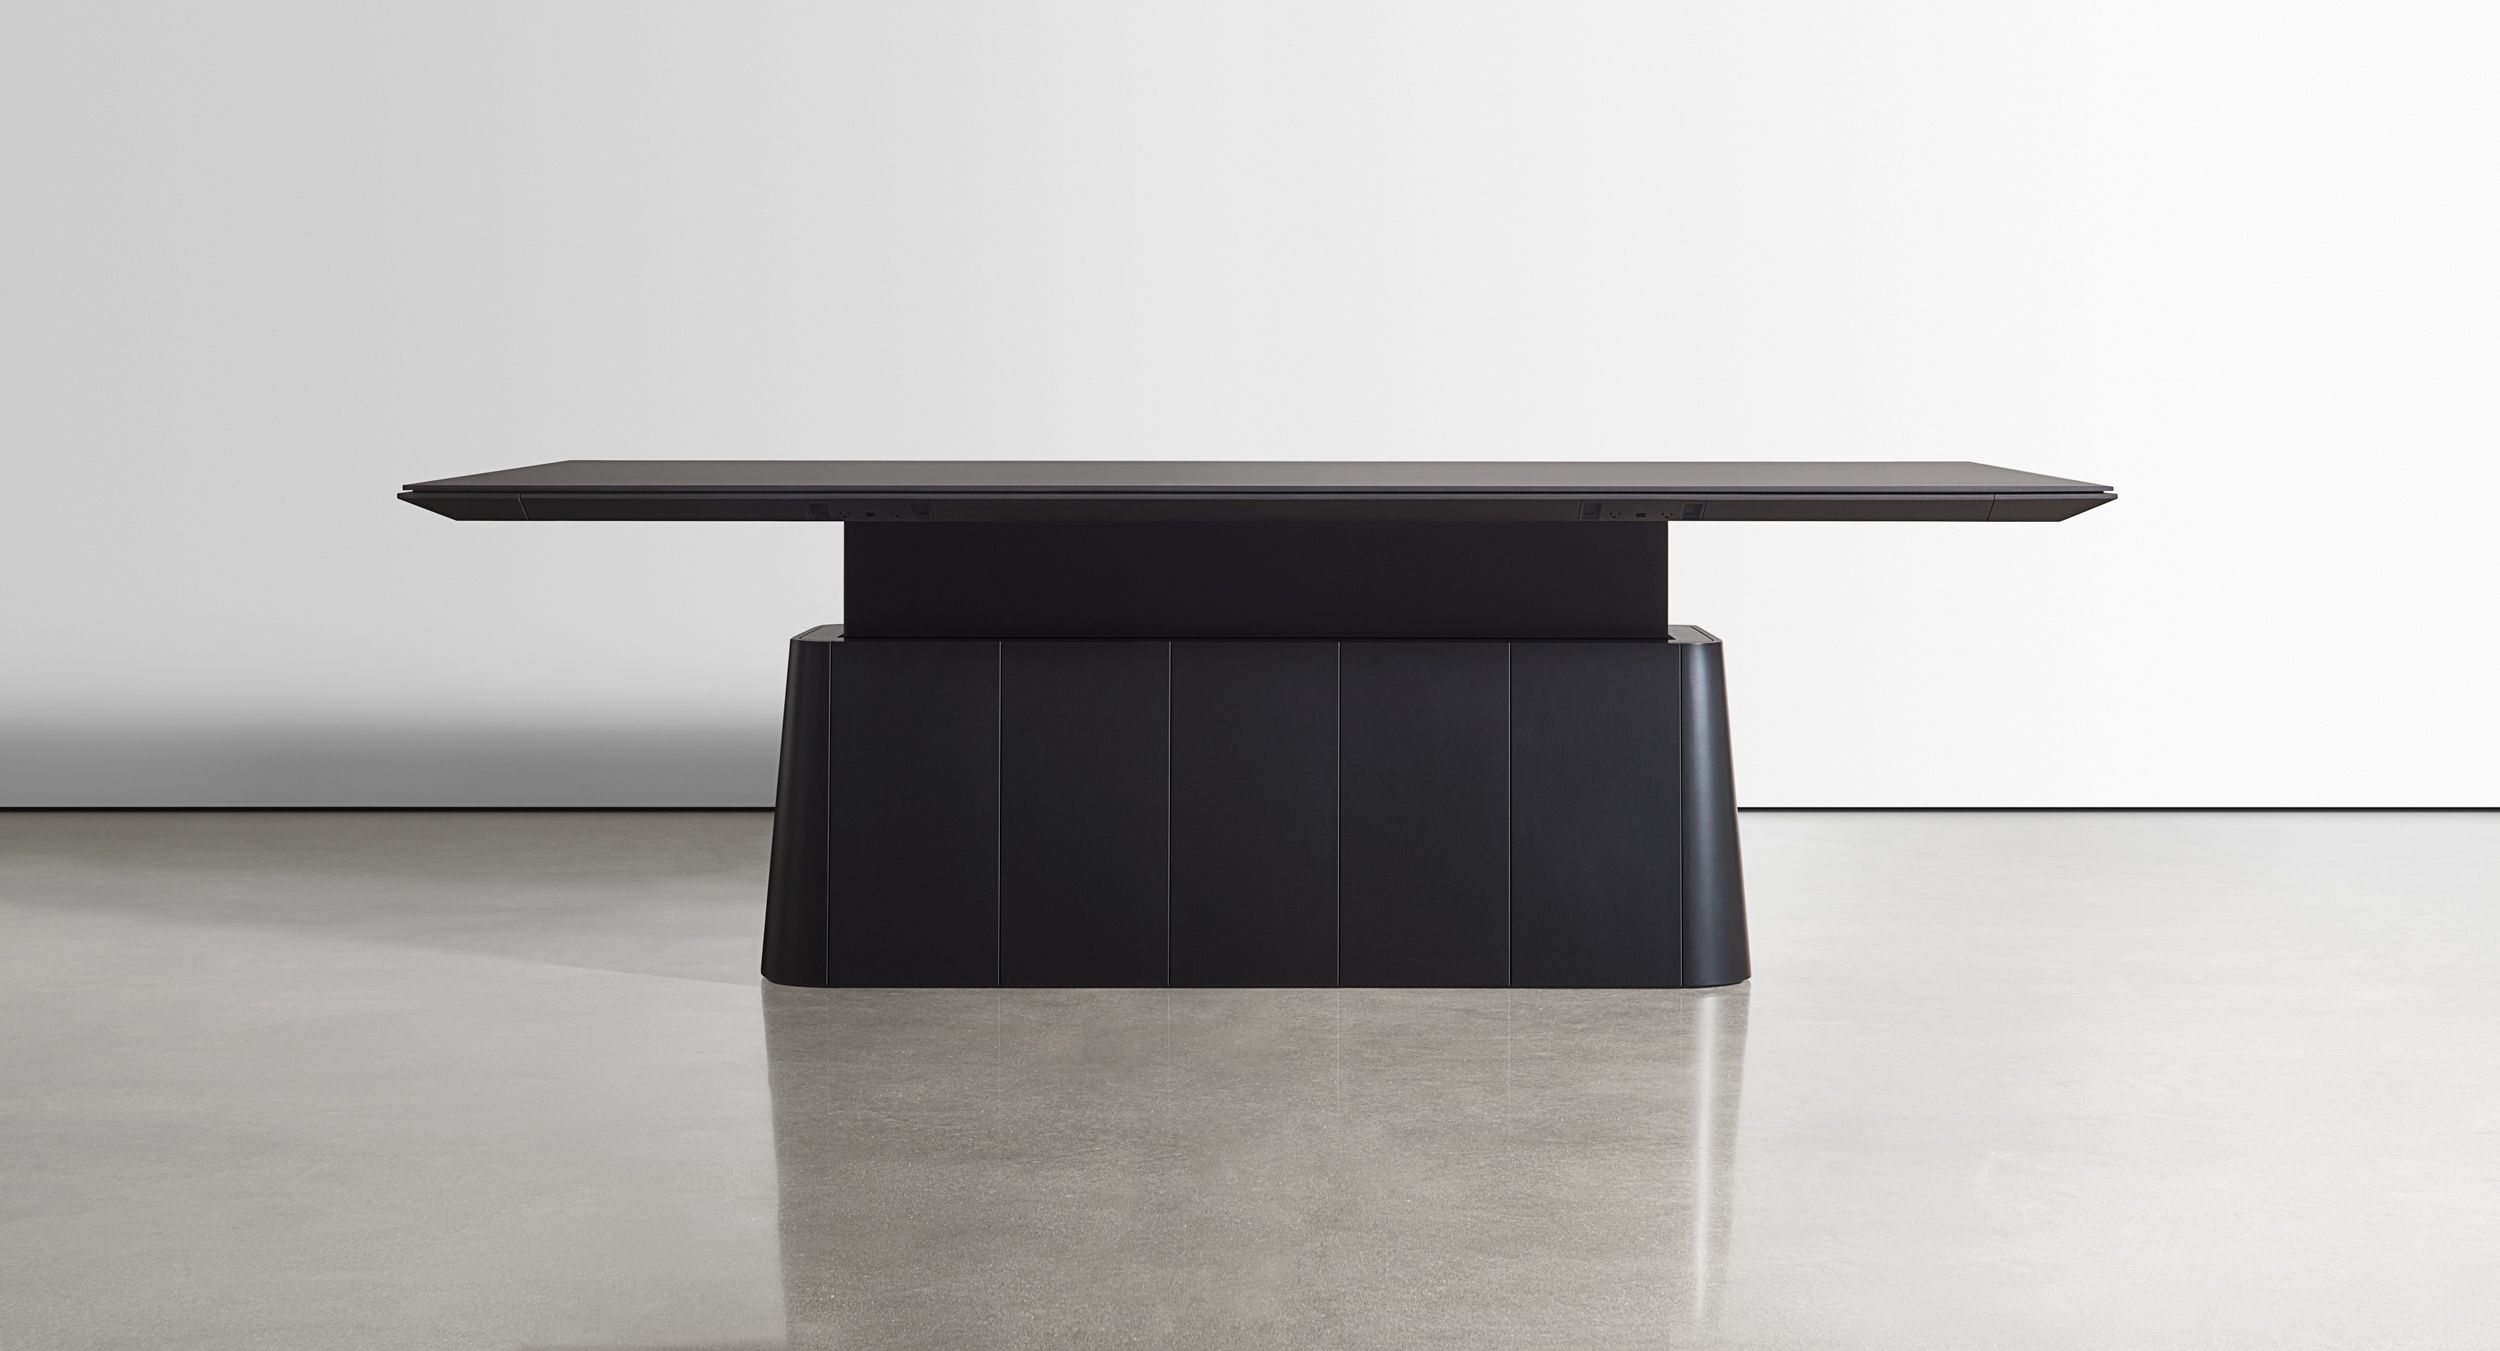 The Halo collection includes award-winning adjustable-height meeting tables.